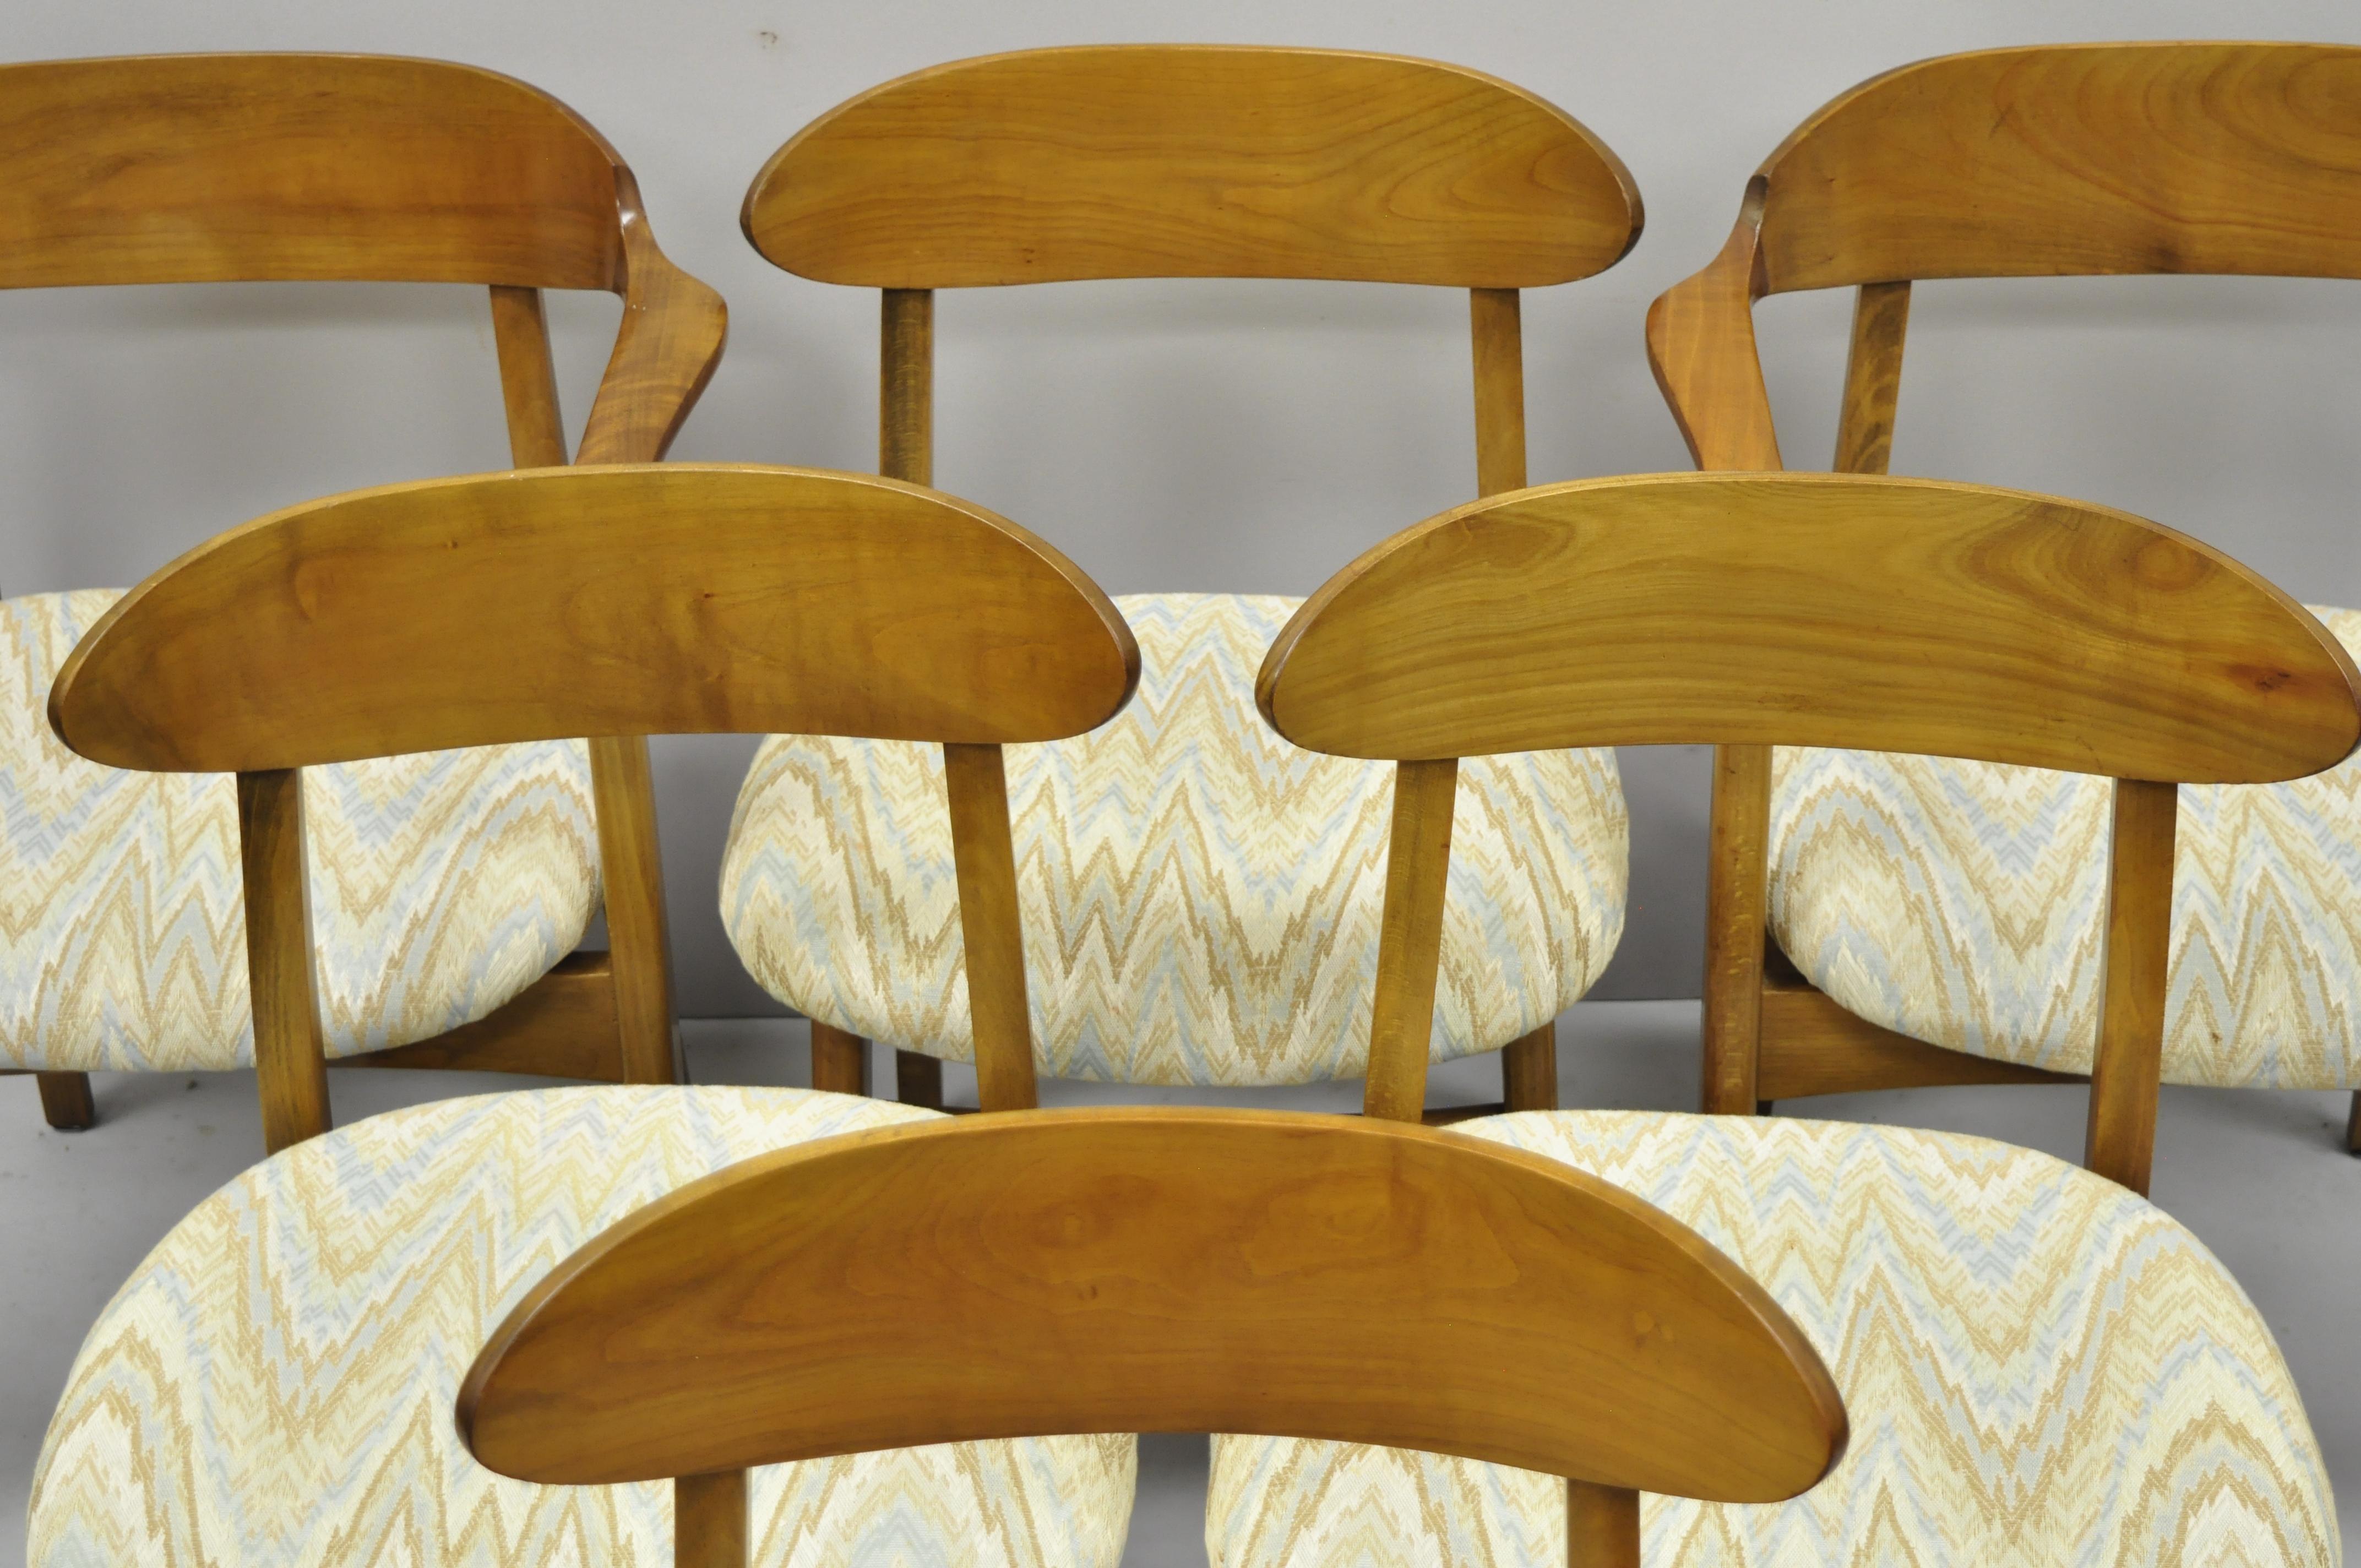 Six vintage Mid-Century Modern sculpted walnut barrel back dining room chairs. Listing features (2) armchairs, (4) side chairs, shapely carved backs, solid wood construction, beautiful wood grain, tapered legs, sleek sculptural form, circa mid-20th